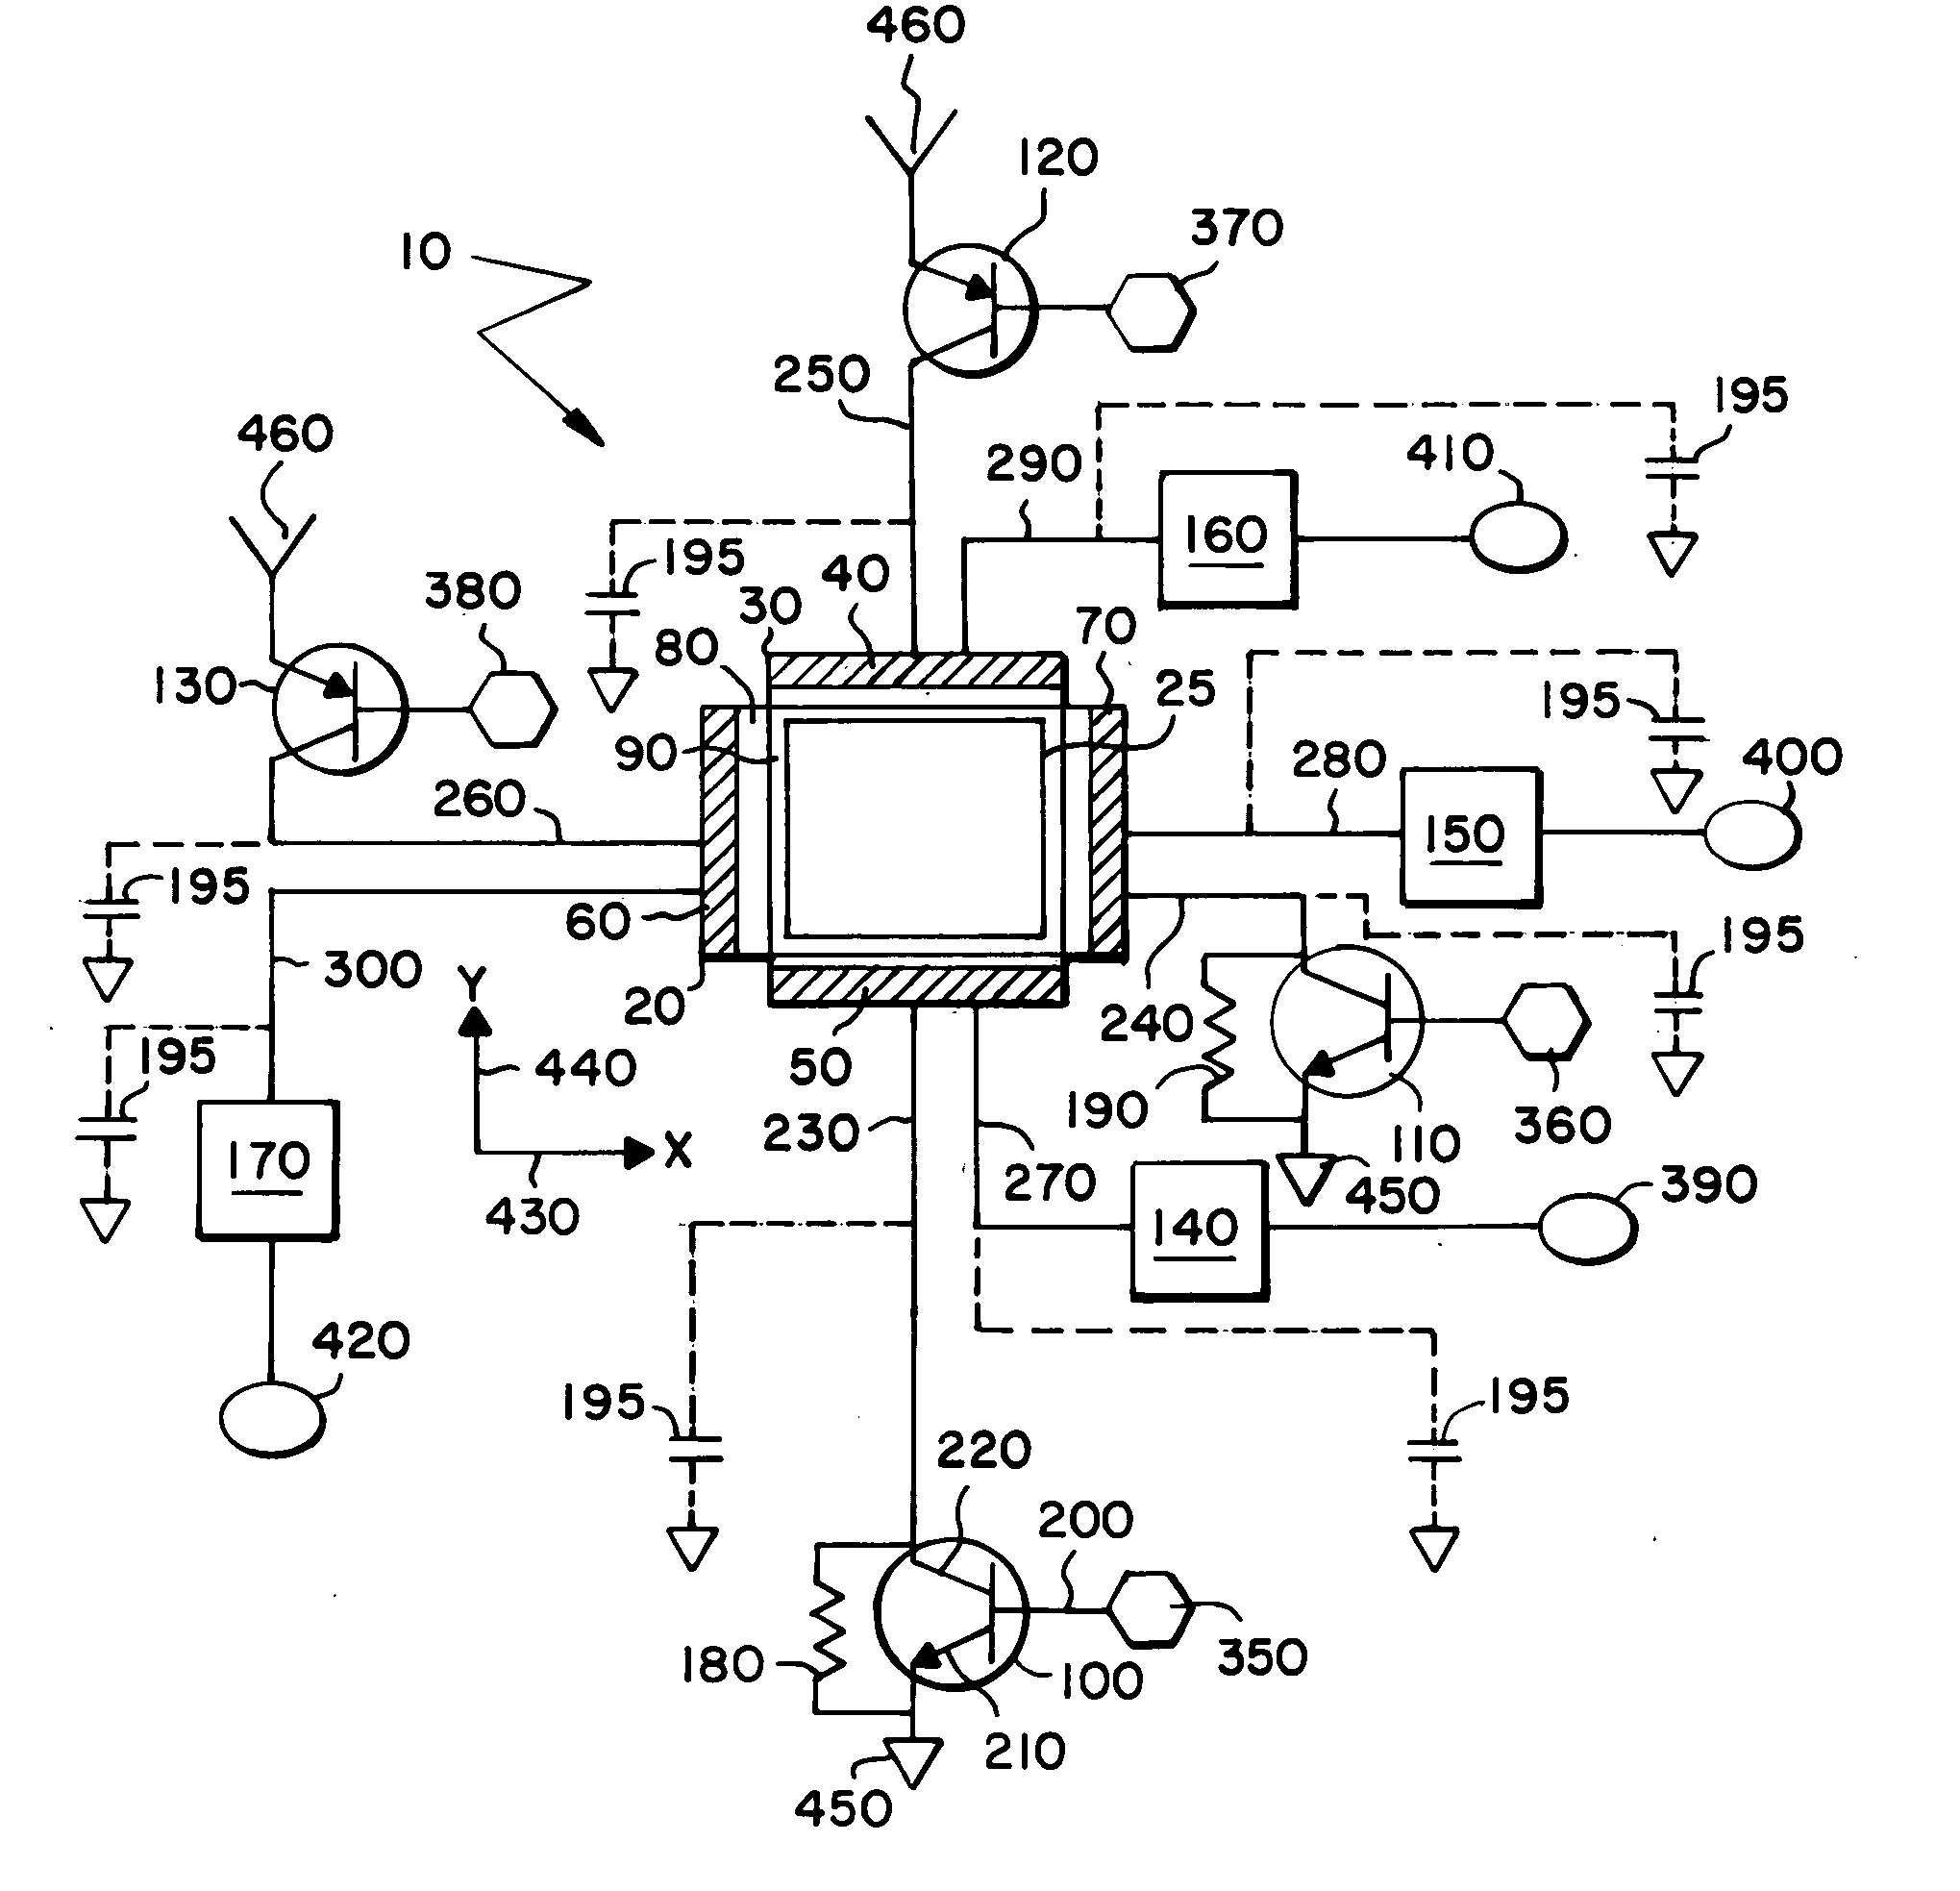 Generating and validating pixel coordinates of a touch screen display